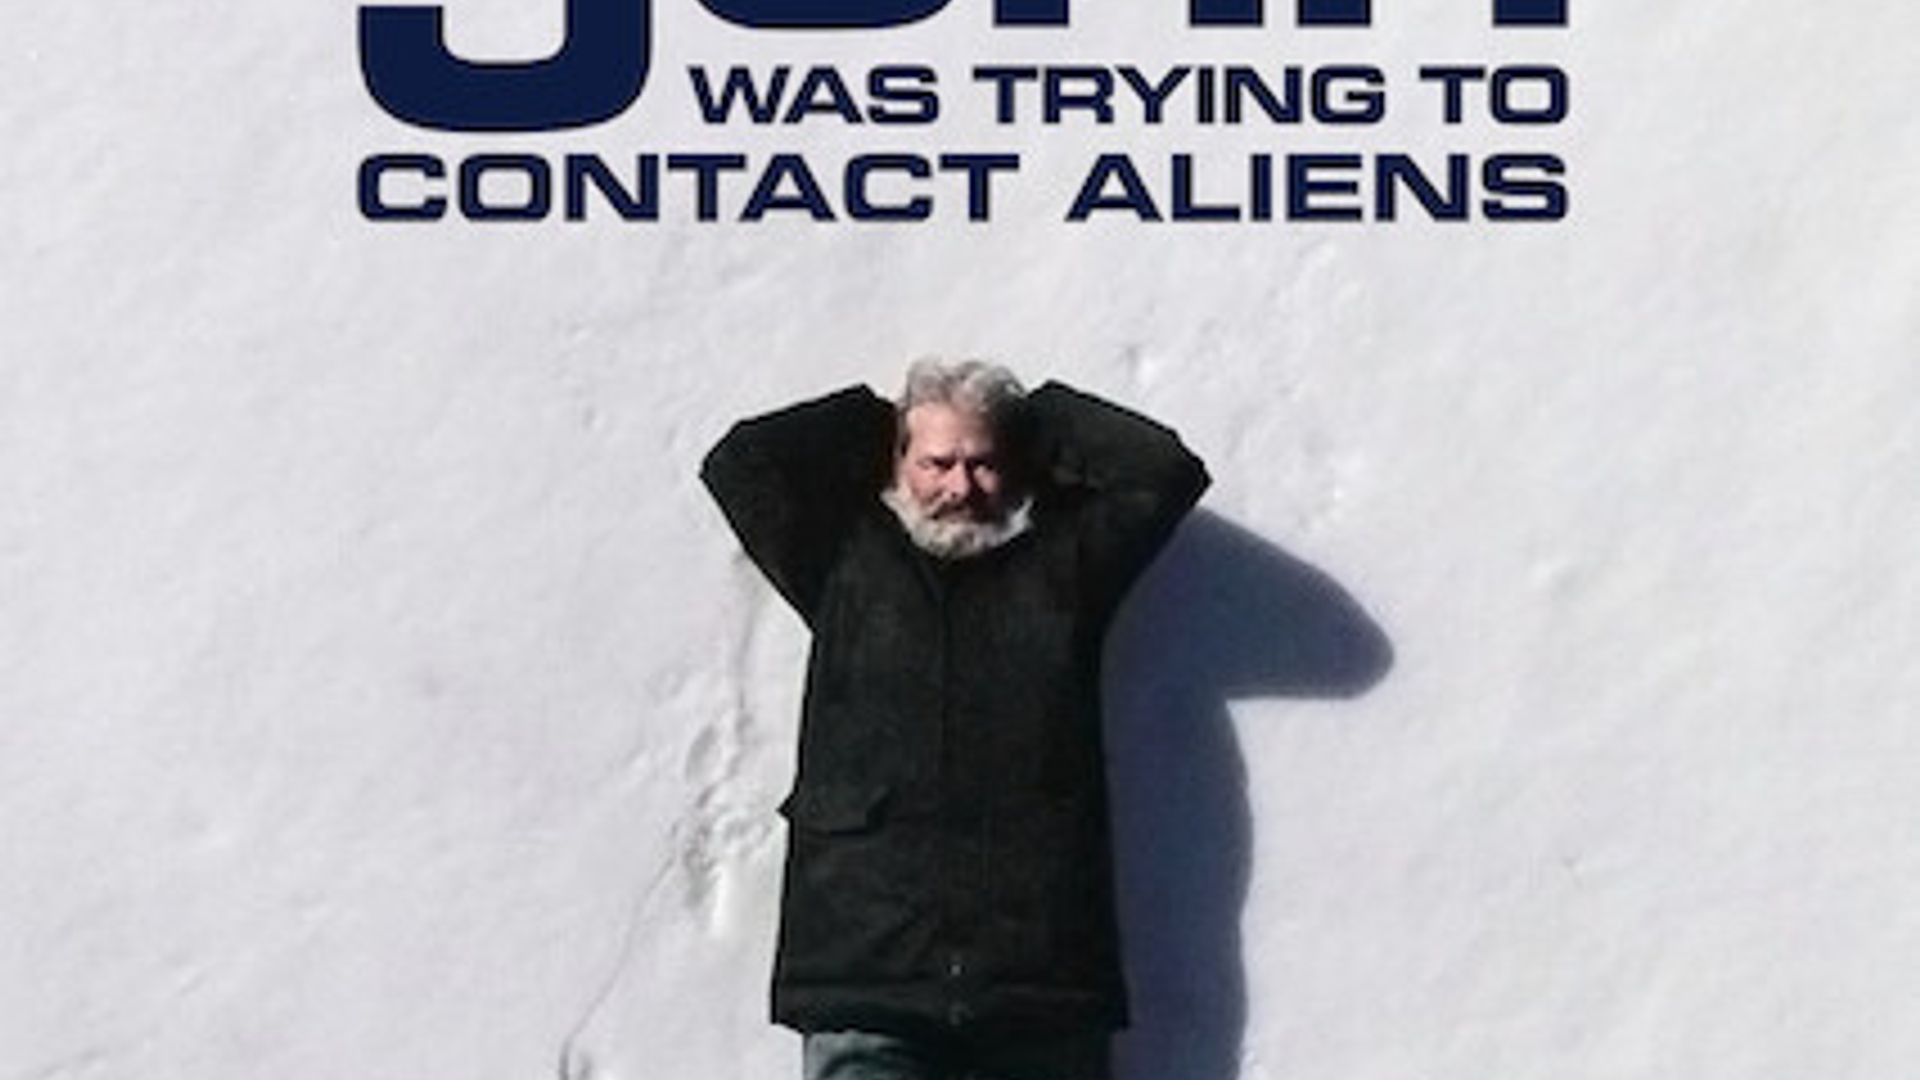 John Was Trying to Contact Aliens